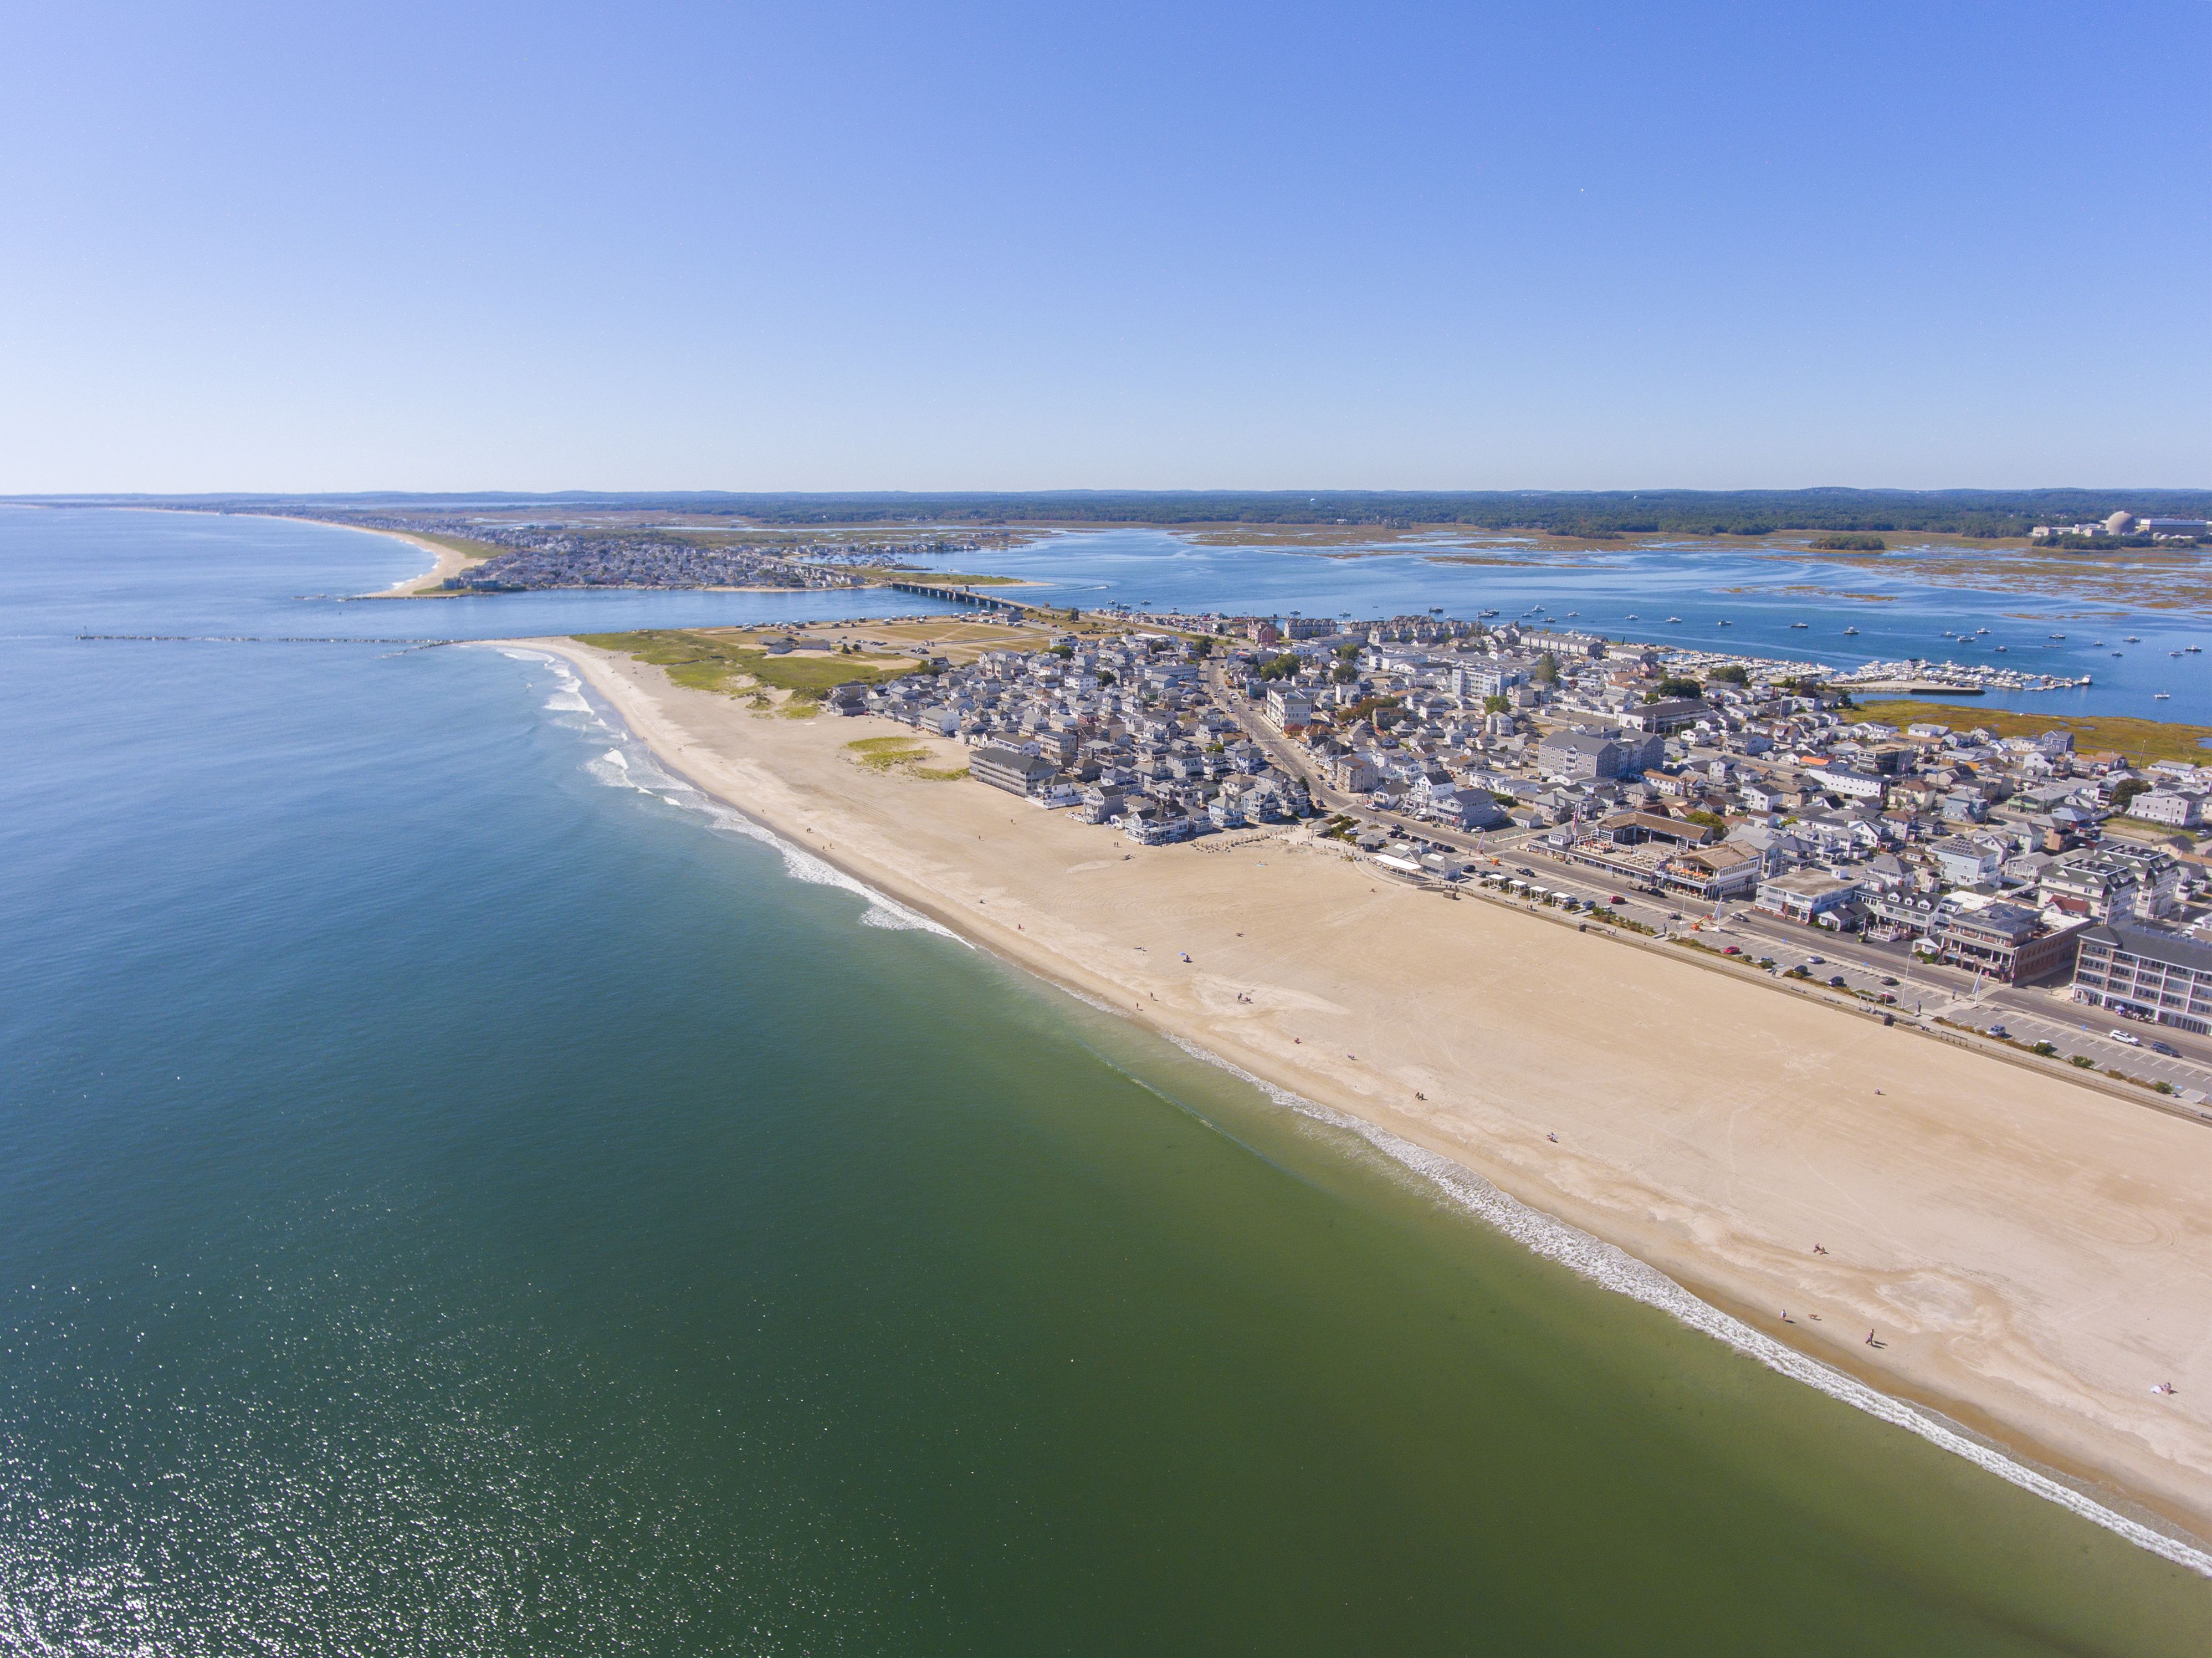 Aerial view of beaches and towns in the Hamptons